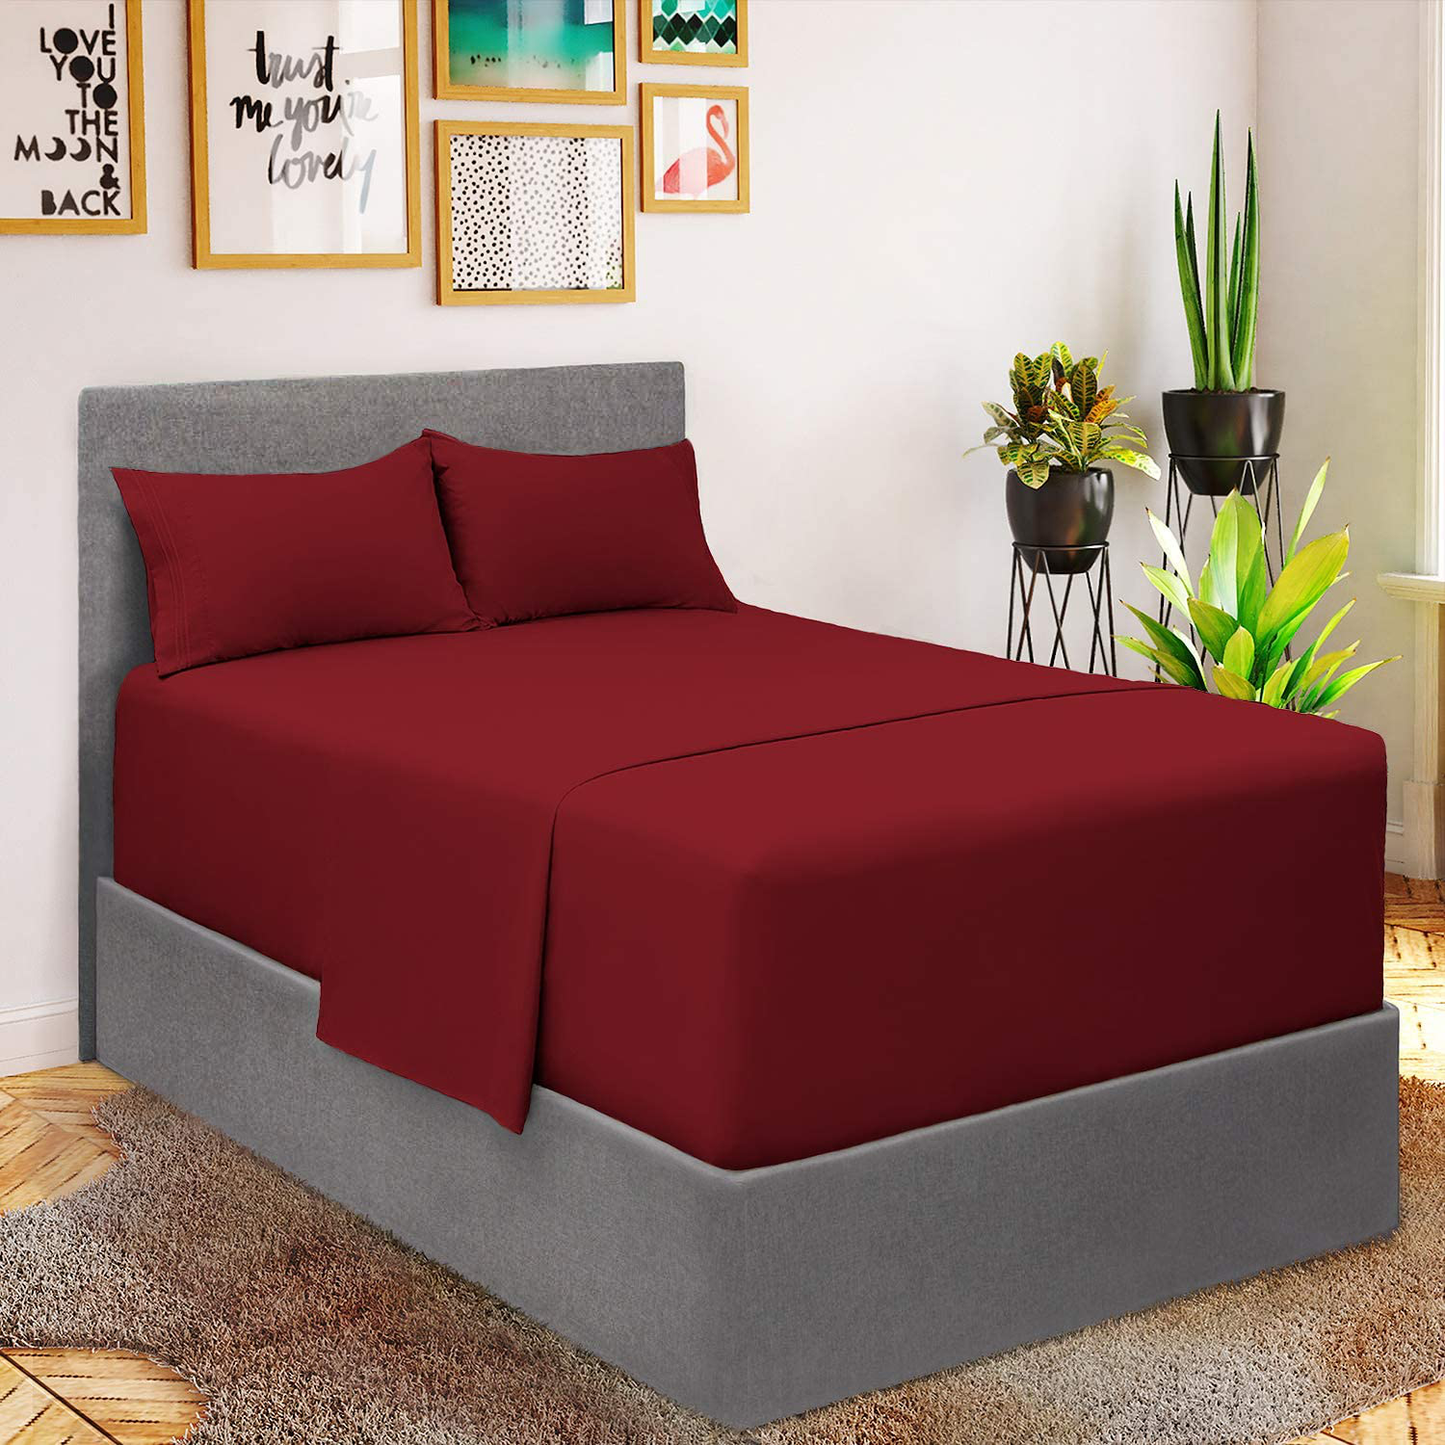 Mellanni Grey Sheets Full Size - Hotel Luxury 1800 Bedding Sheets & Pillowcases - Extra Soft Cooling Bed Sheets - Deep Pocket up to 16" Mattress - Wrinkle, Fade, Stain Resistant - 4 Piece (Full, Gray) Animals & Pet Supplies > Pet Supplies > Dog Supplies > Dog Treadmills Mellanni Burgundy EXTRA DEEP pocket - Twin size 